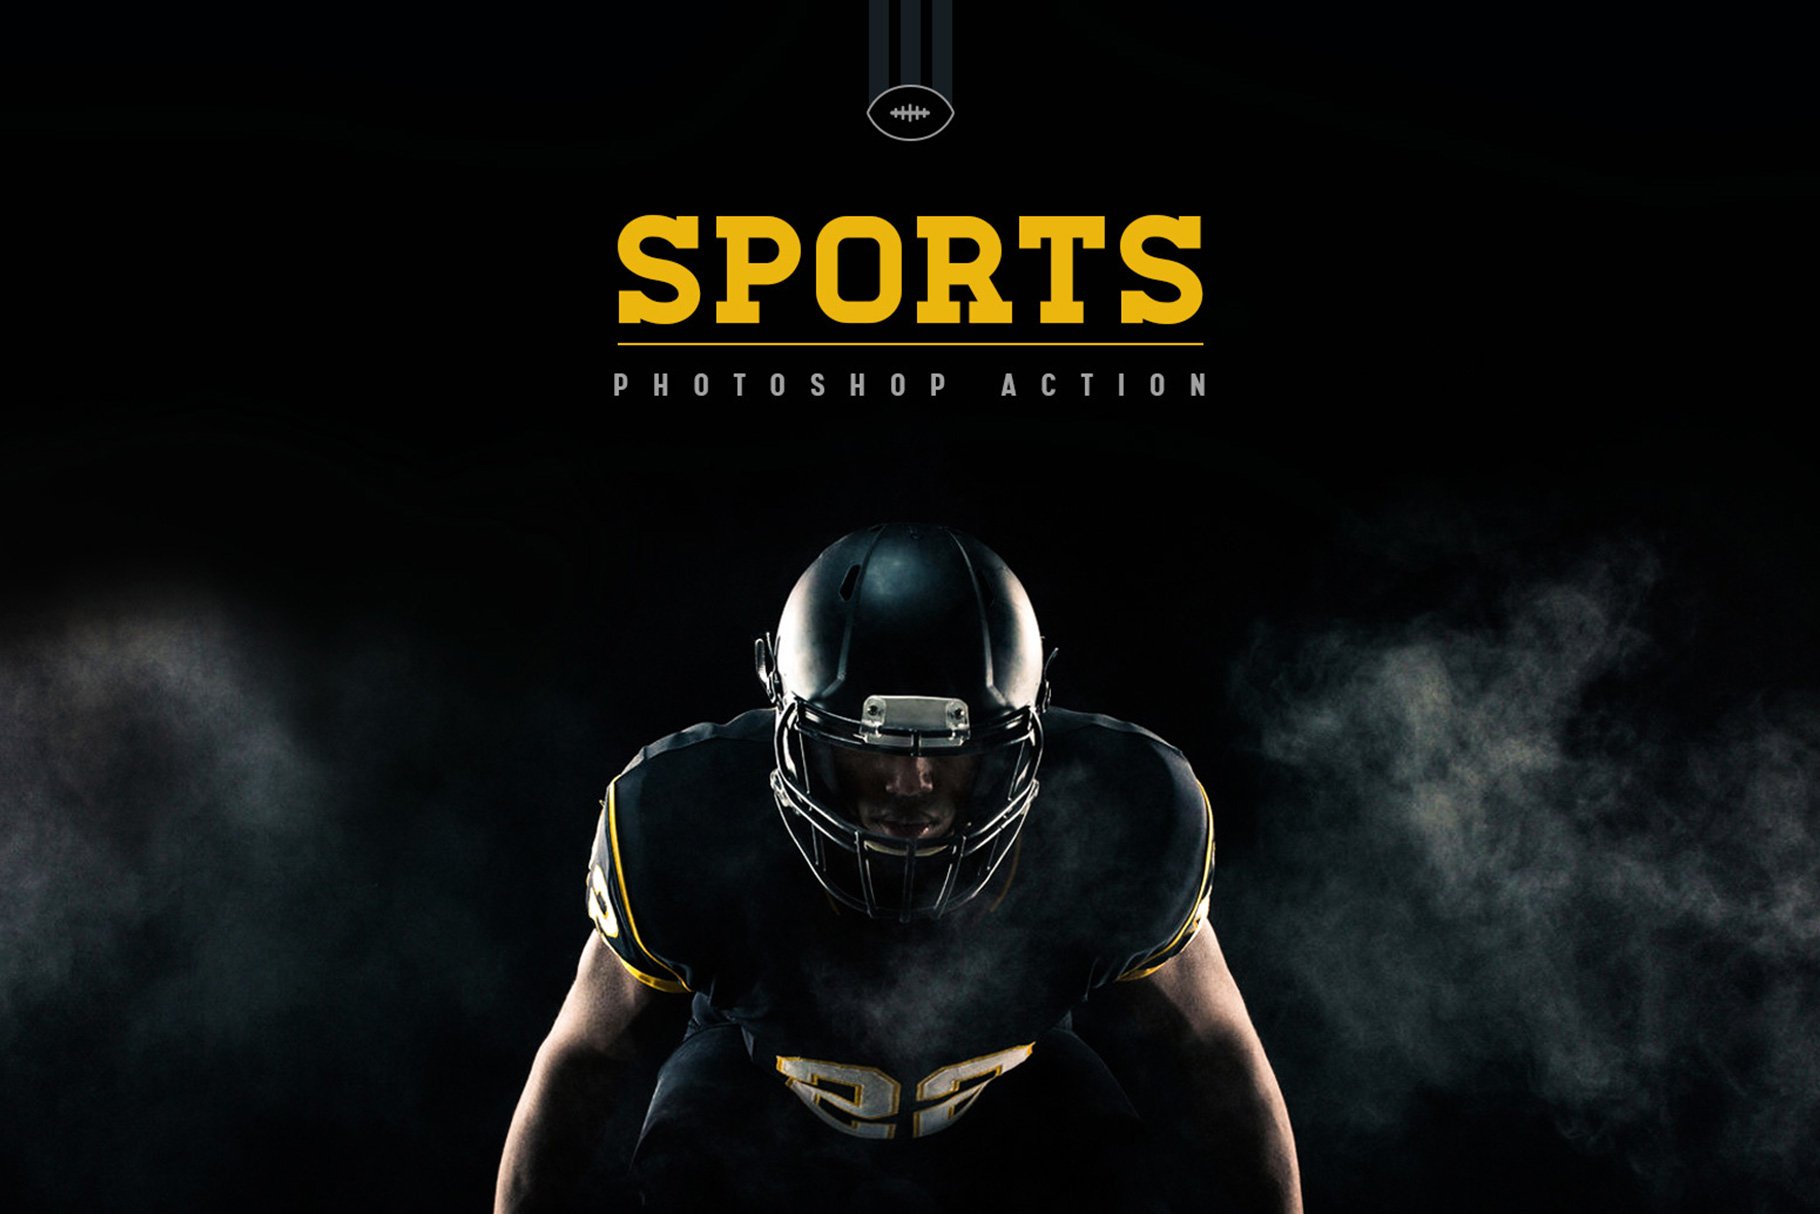 Sports Photoshop Actioncover image.